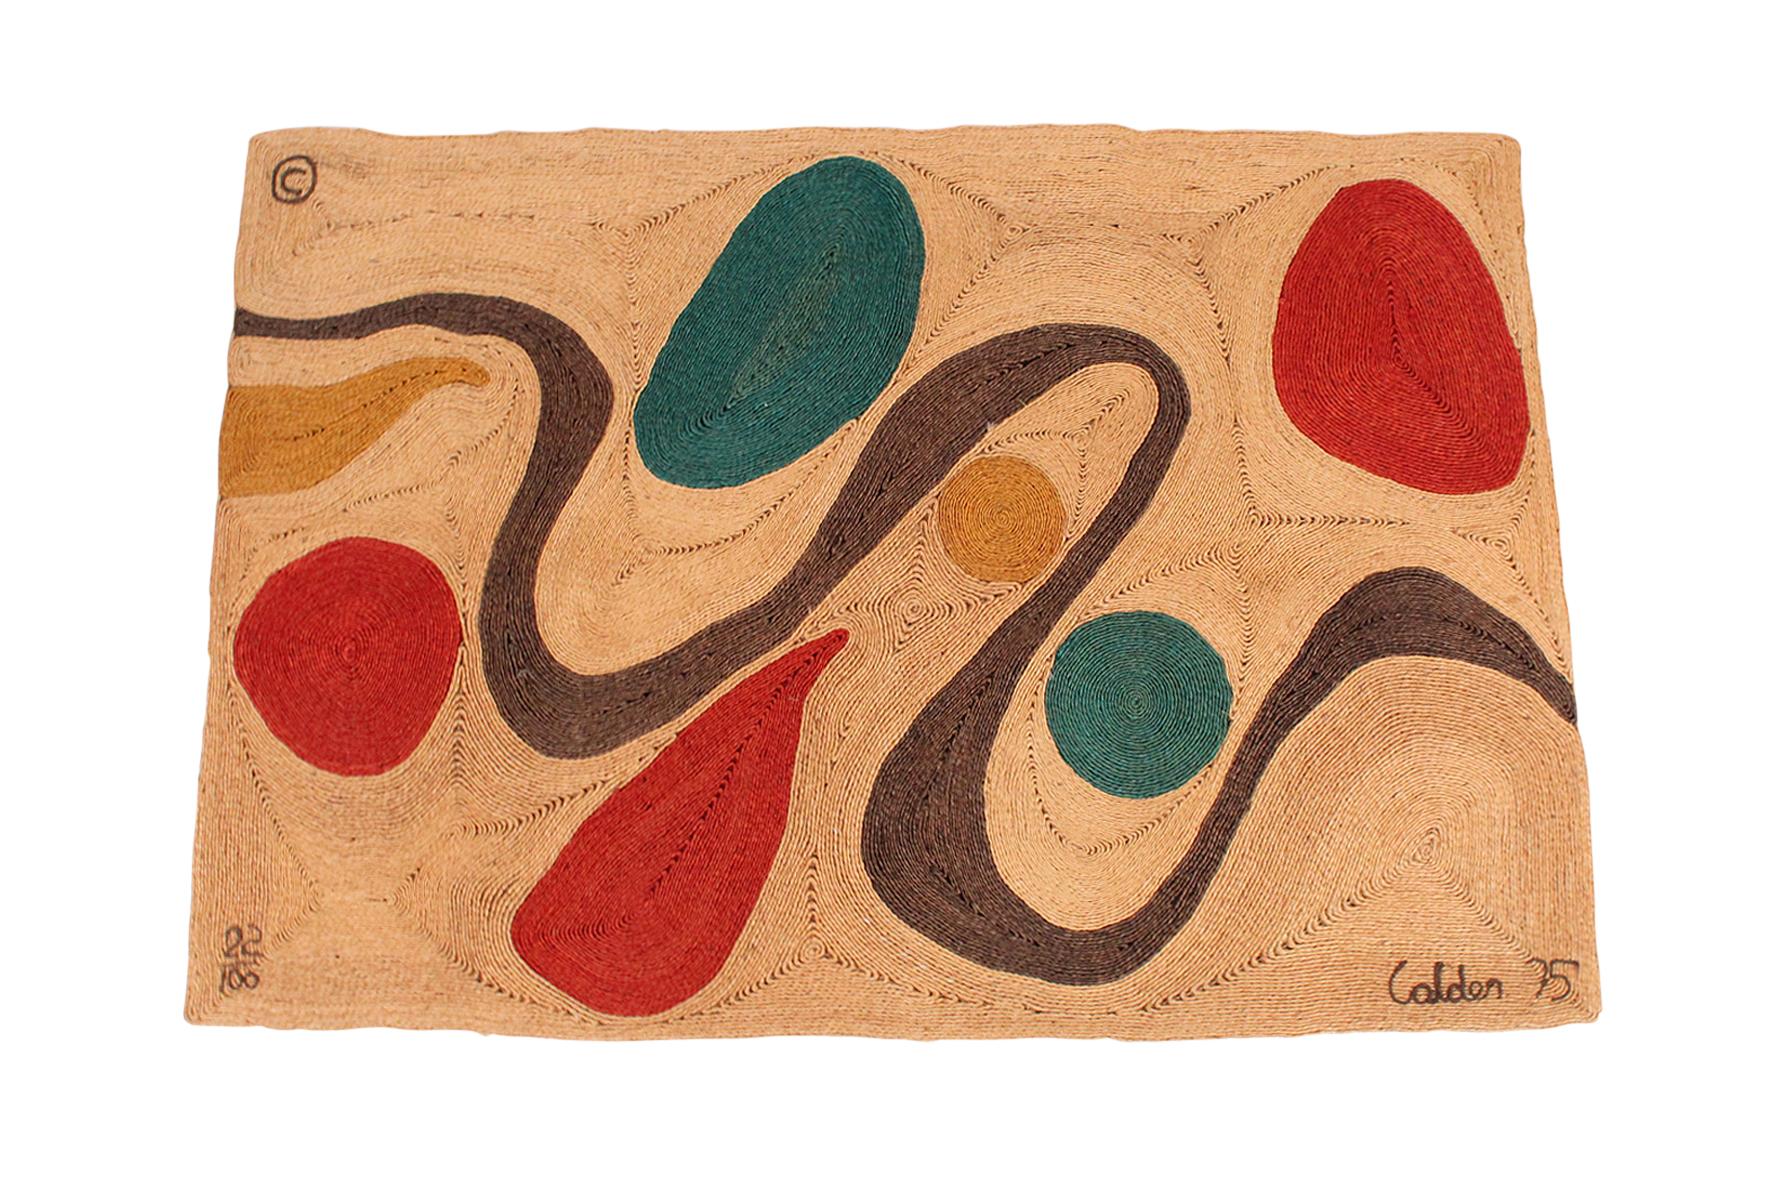 Alexander Calder jute fiber tapestry titled “Turquoise”. Produced by CAC Publication and Bon Art, Nicaragua in 1975. This example is #22/100. Embroidered mark to lower right “Calder 75”.